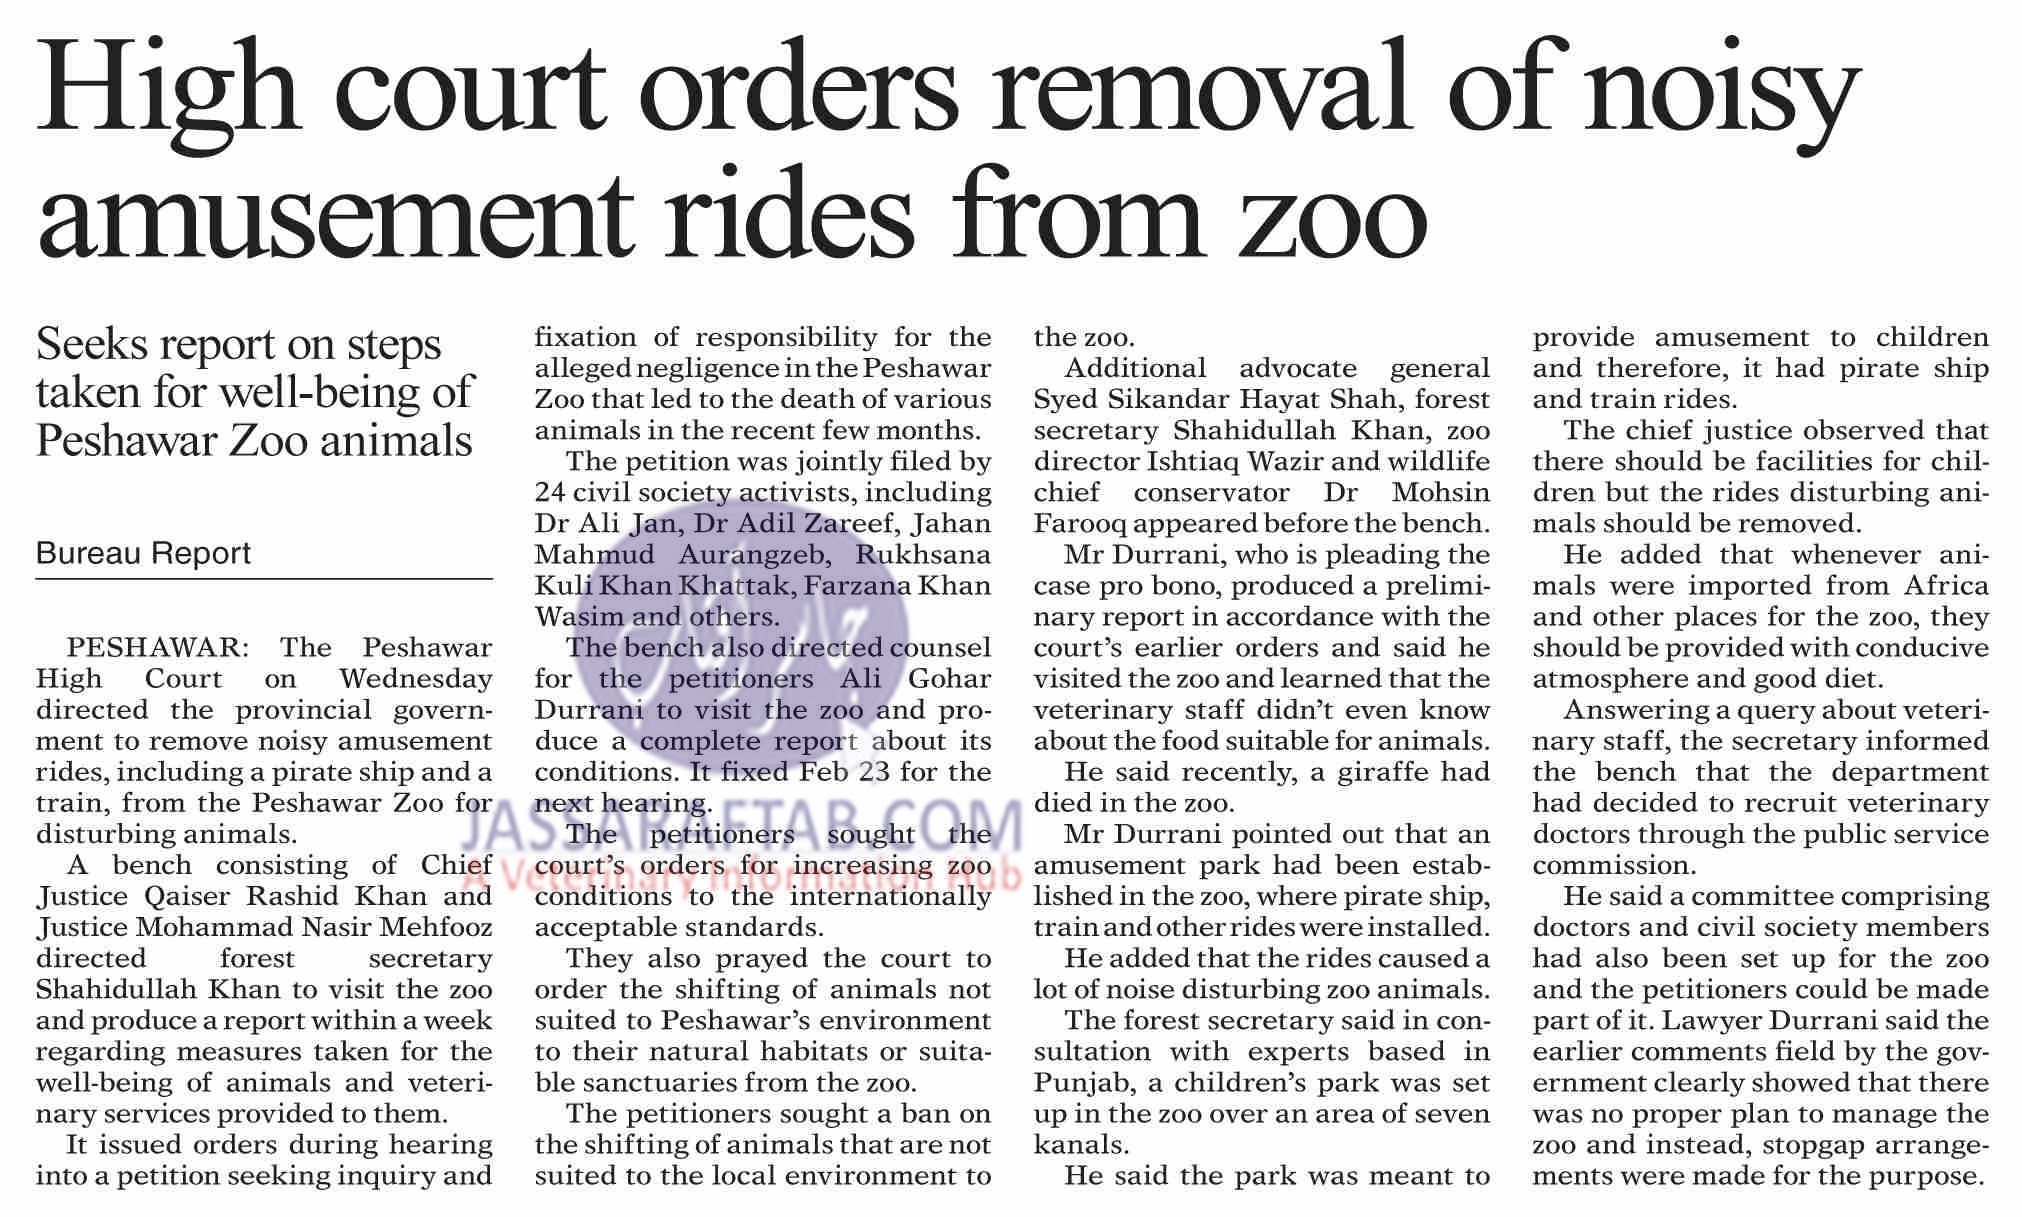 remove noisy amusement rides for the peace of animals in zoo 